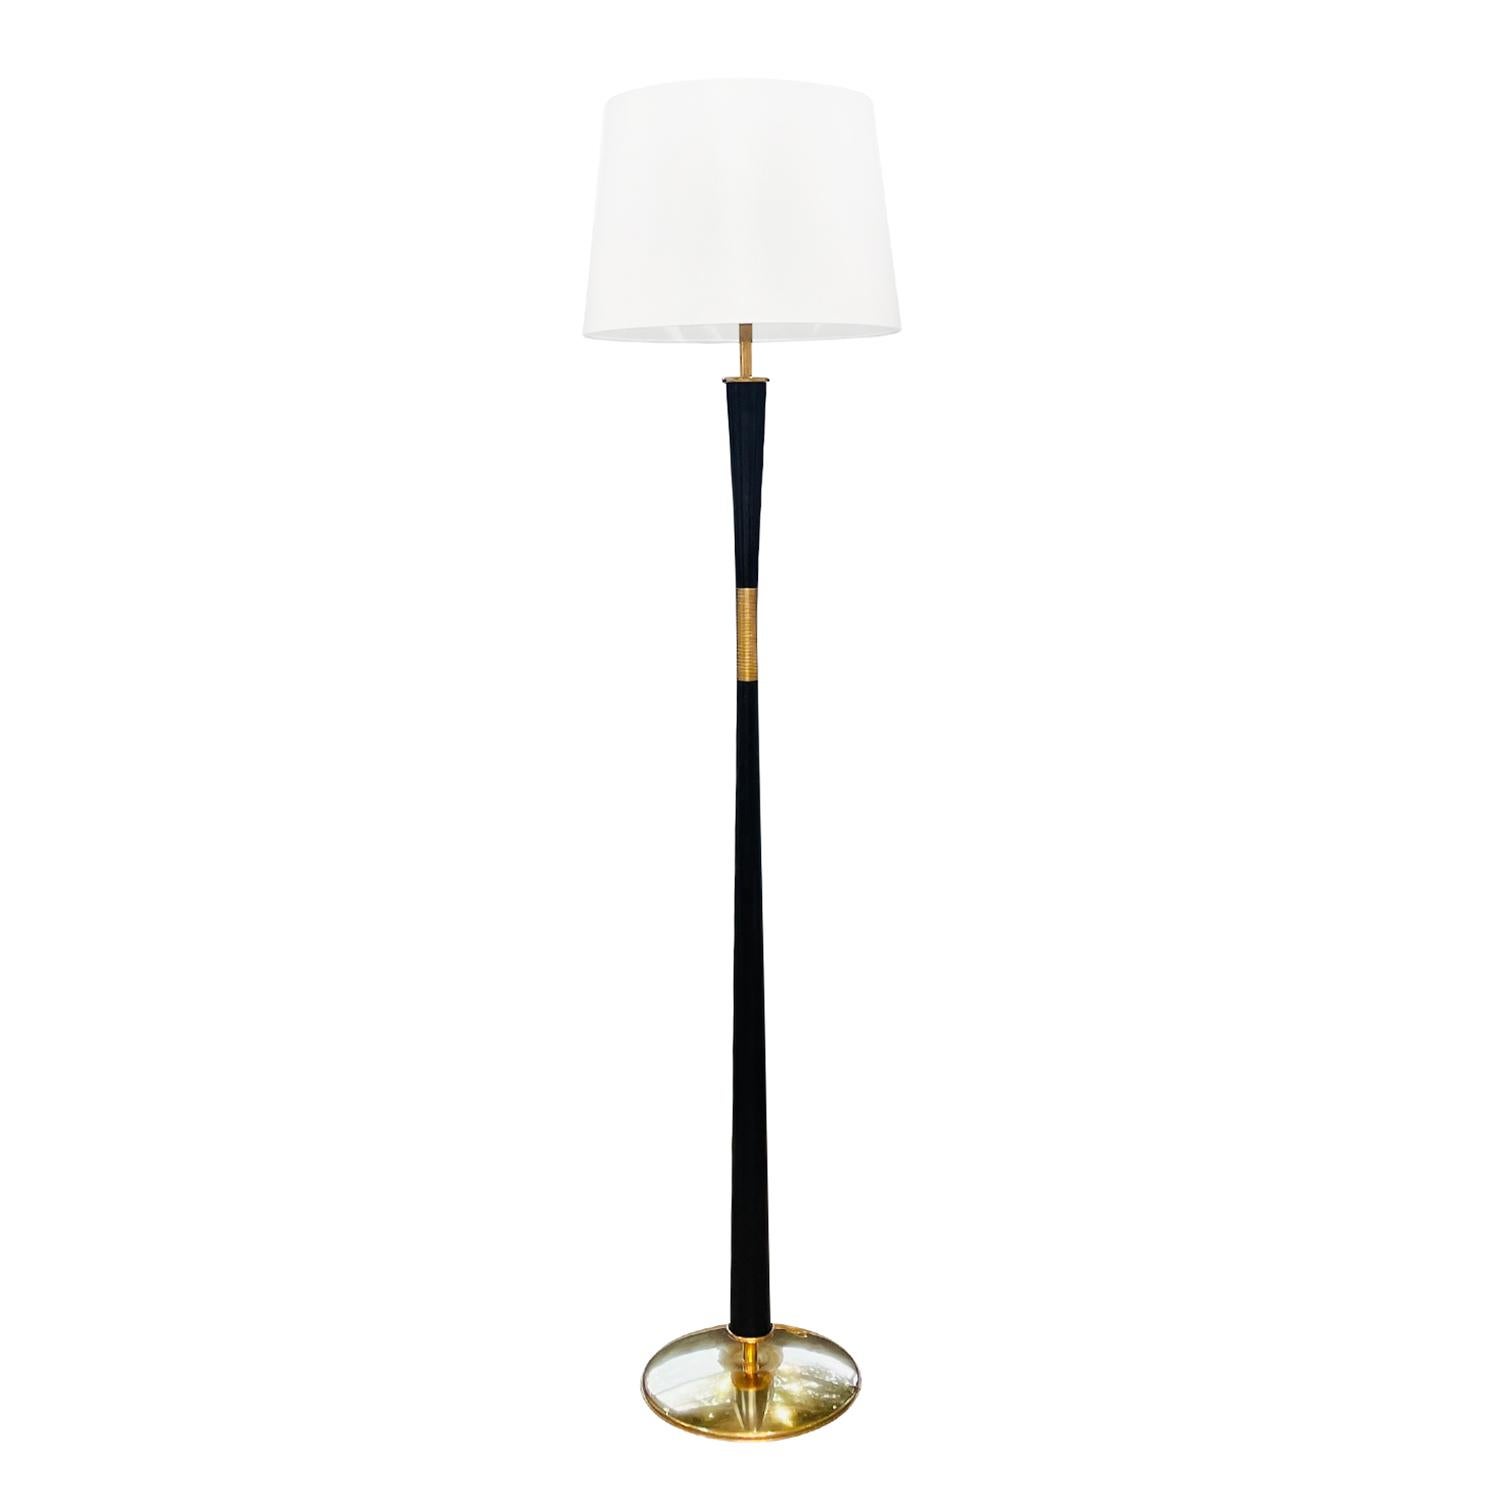 A vintage Mid-Century modern Italian floor lamp with a new white round shade, made of hand crafted iron in good condition. The tall light is enhanced by a polished ribbed brass ring, resting on a round base. The modern lighting is composed with its